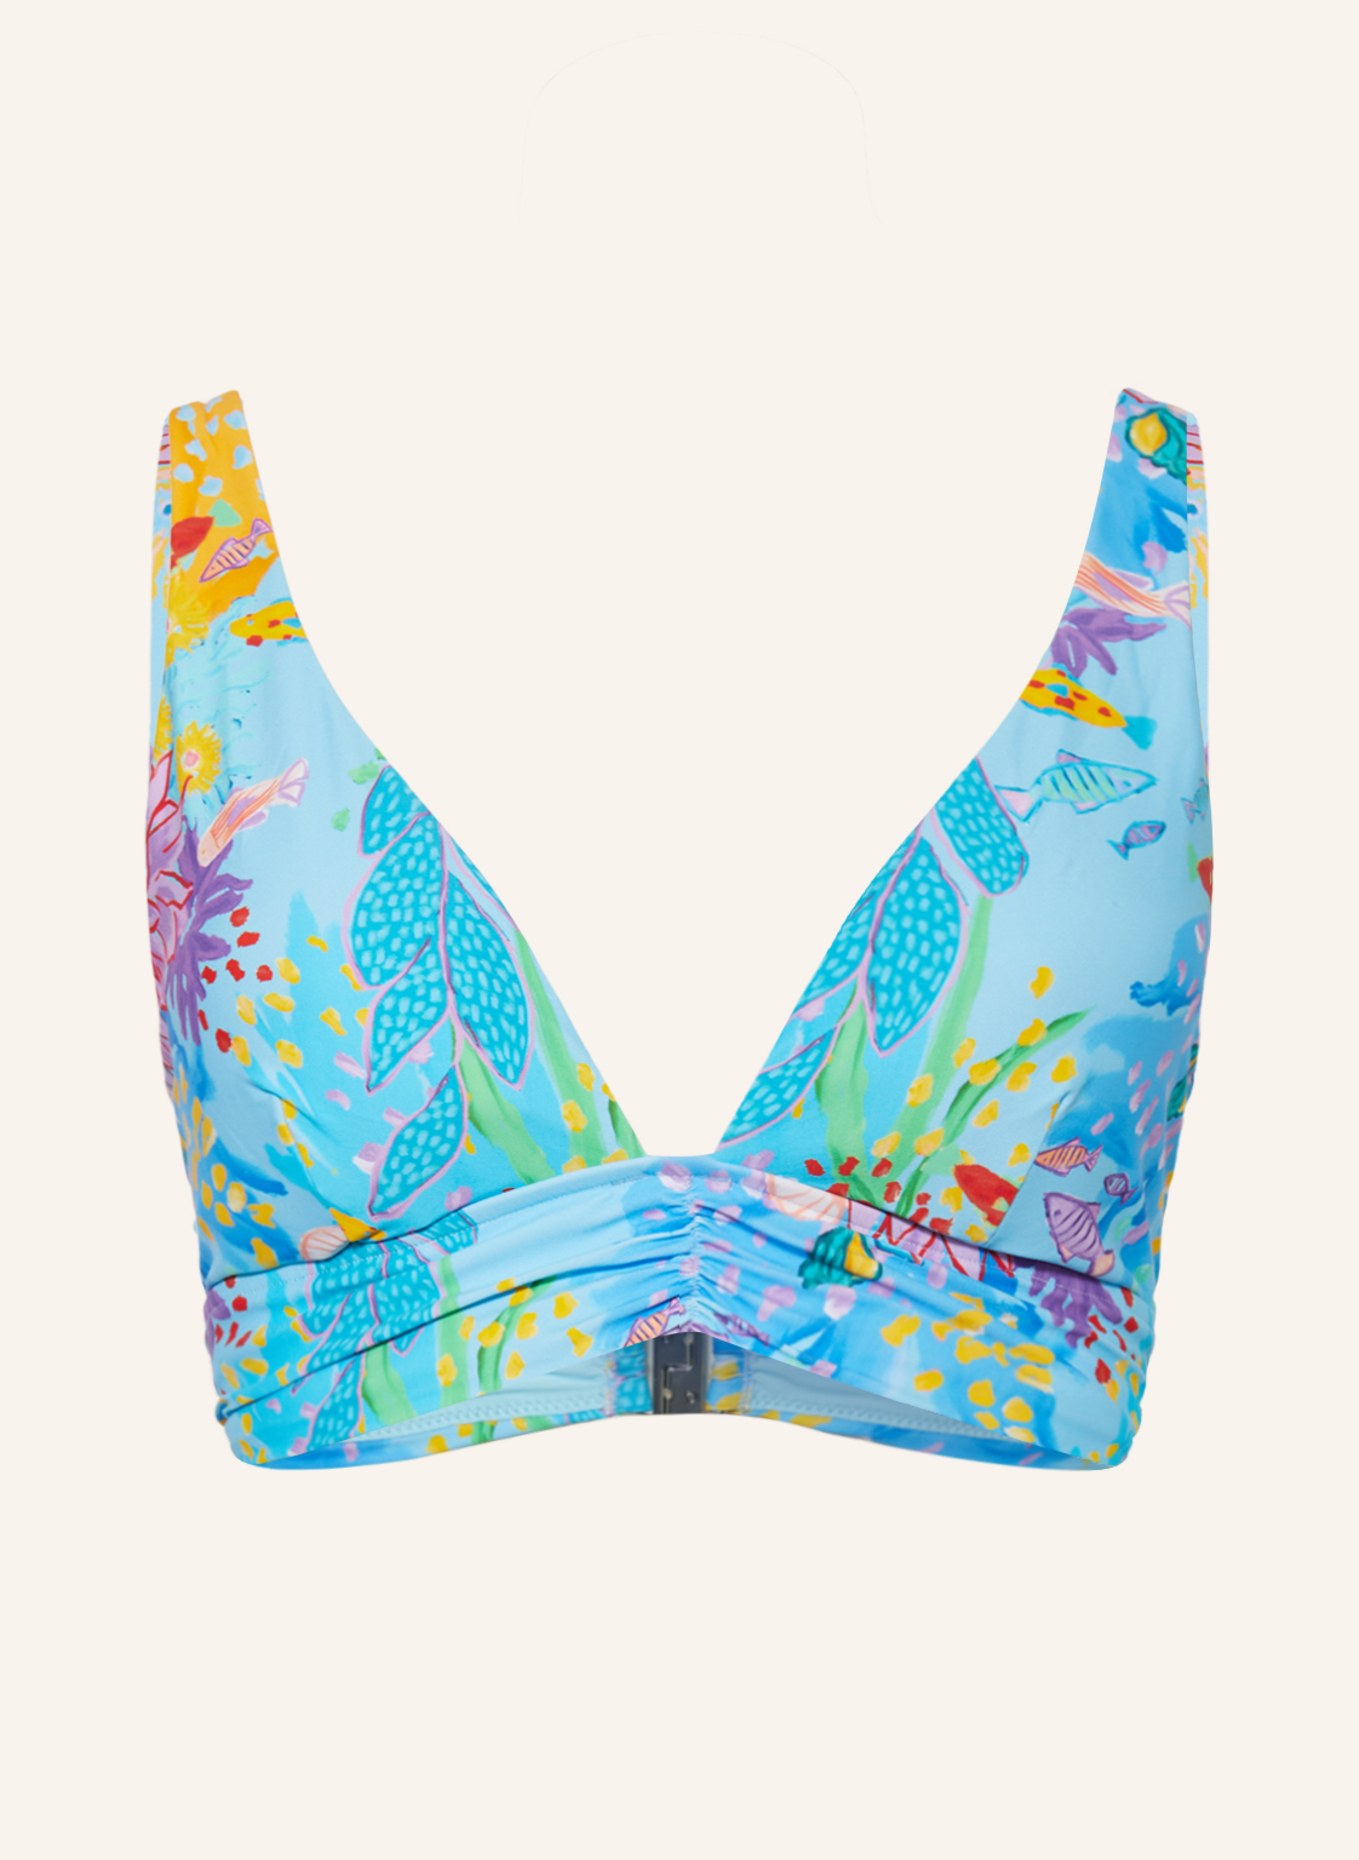 SEAFOLLY Bralette bikini top UNDER THE SEA, Color: LIGHT BLUE/ TURQUOISE/ YELLOW (Image 1)